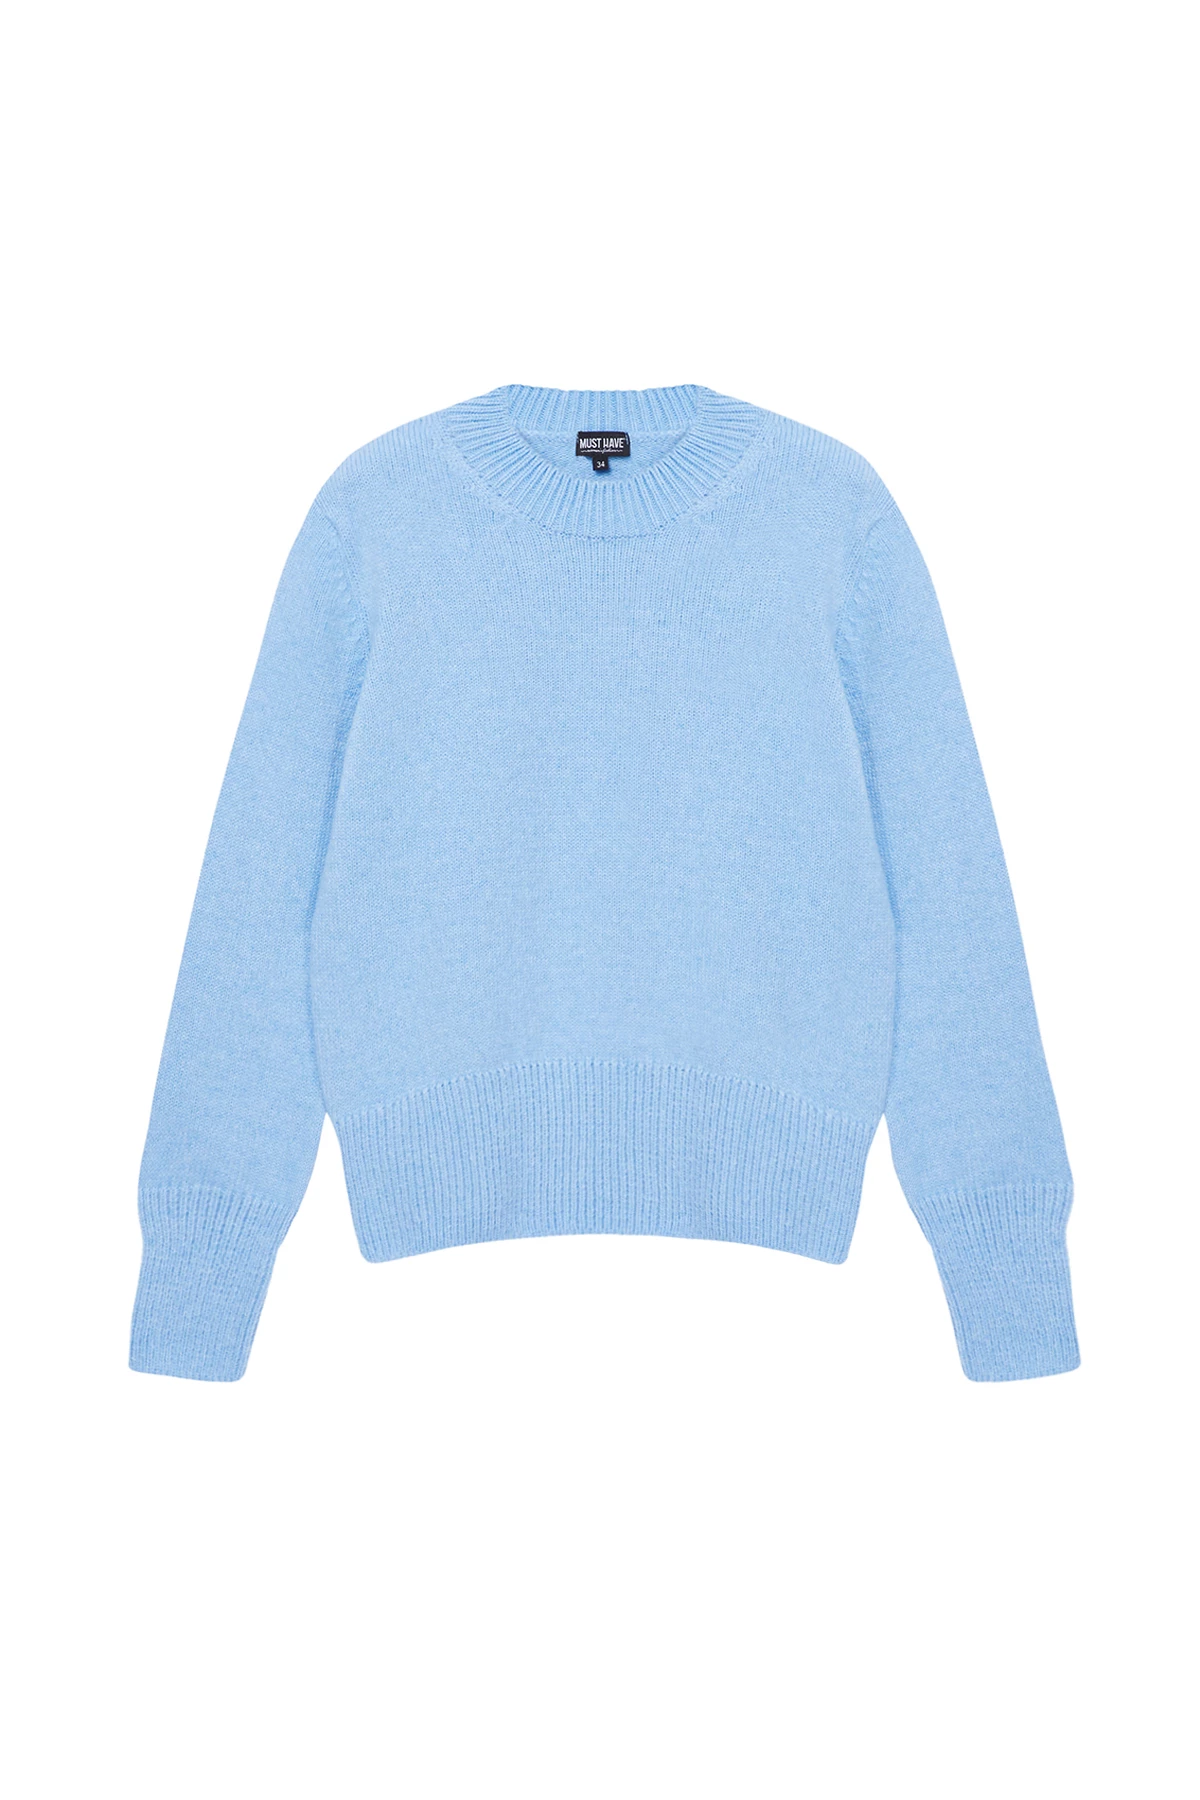 Blue knitted basic sweater with wool, photo 7